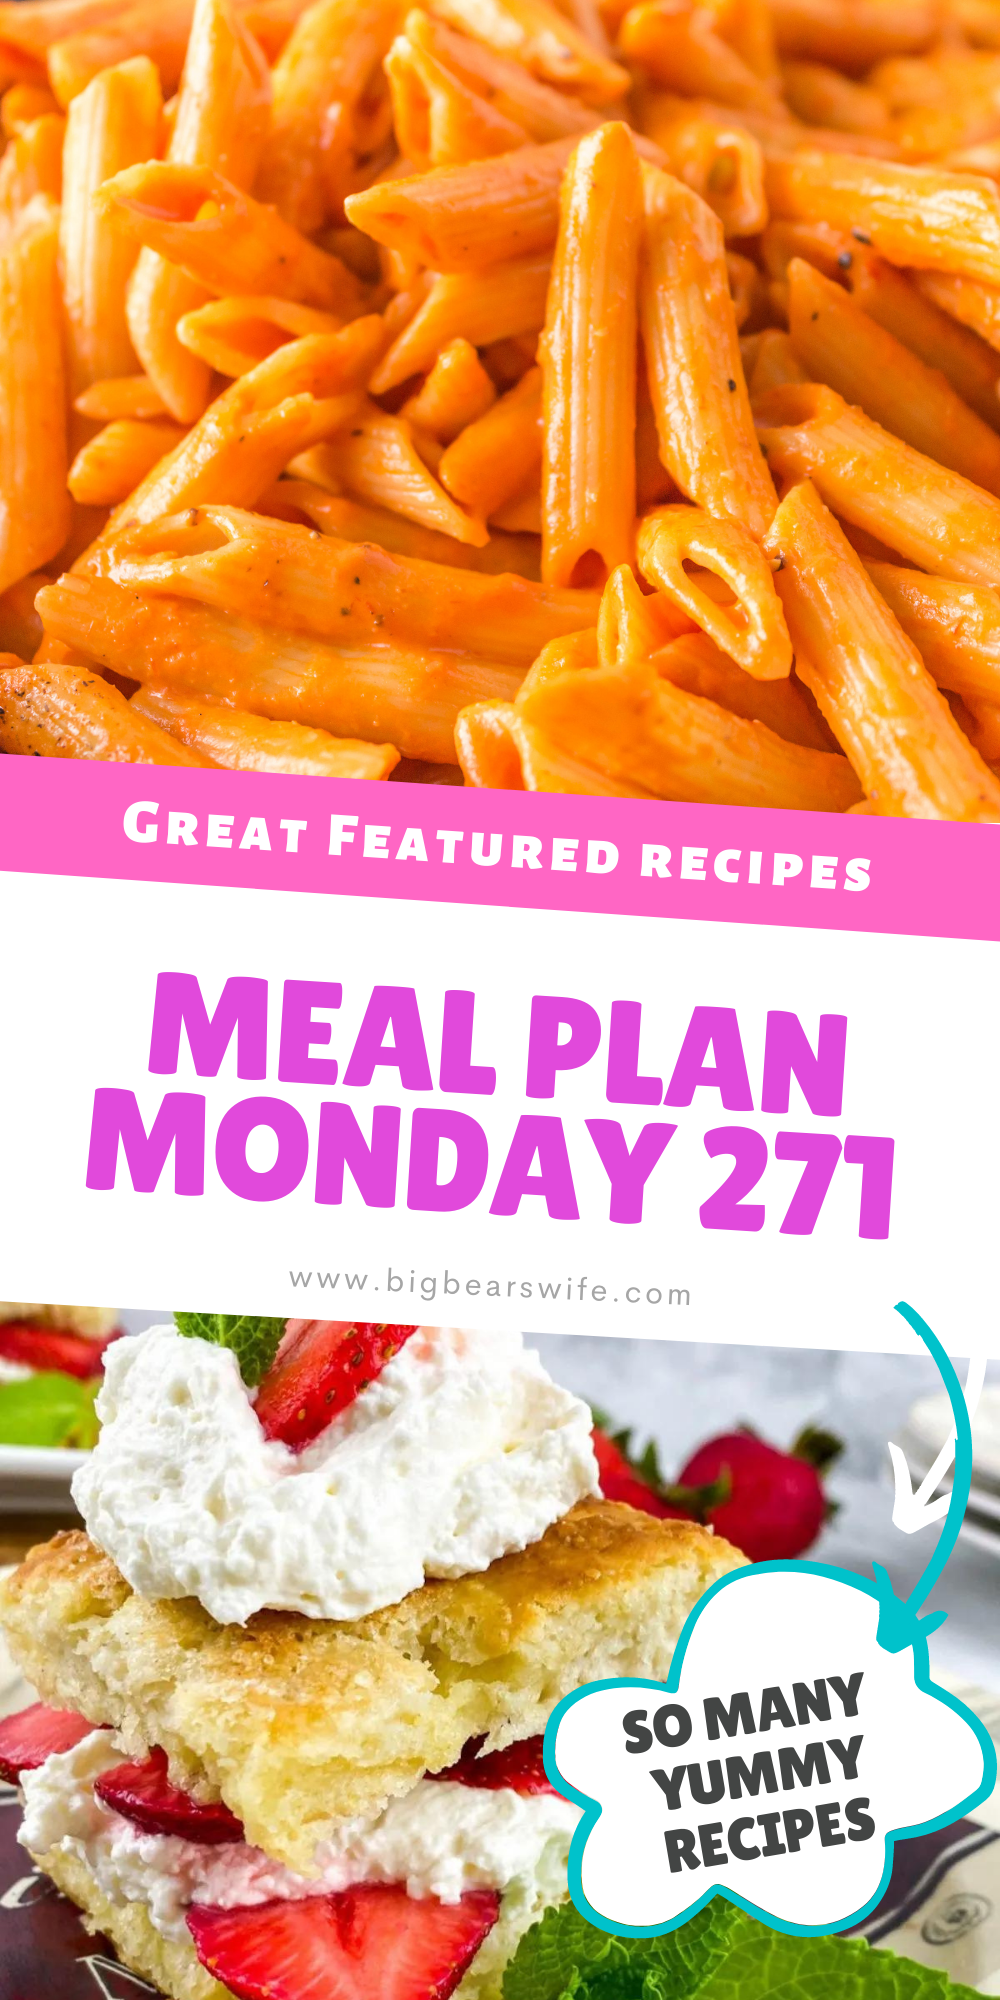 Welcome to Meal Plan Monday 271!  This week we're featuring recipes for Berry Yogurt Breakfast Pops, Sausage & Pepper Pizza, Traditional Strawberry Shortcake and Penne Alla Vodka! via @bigbearswife